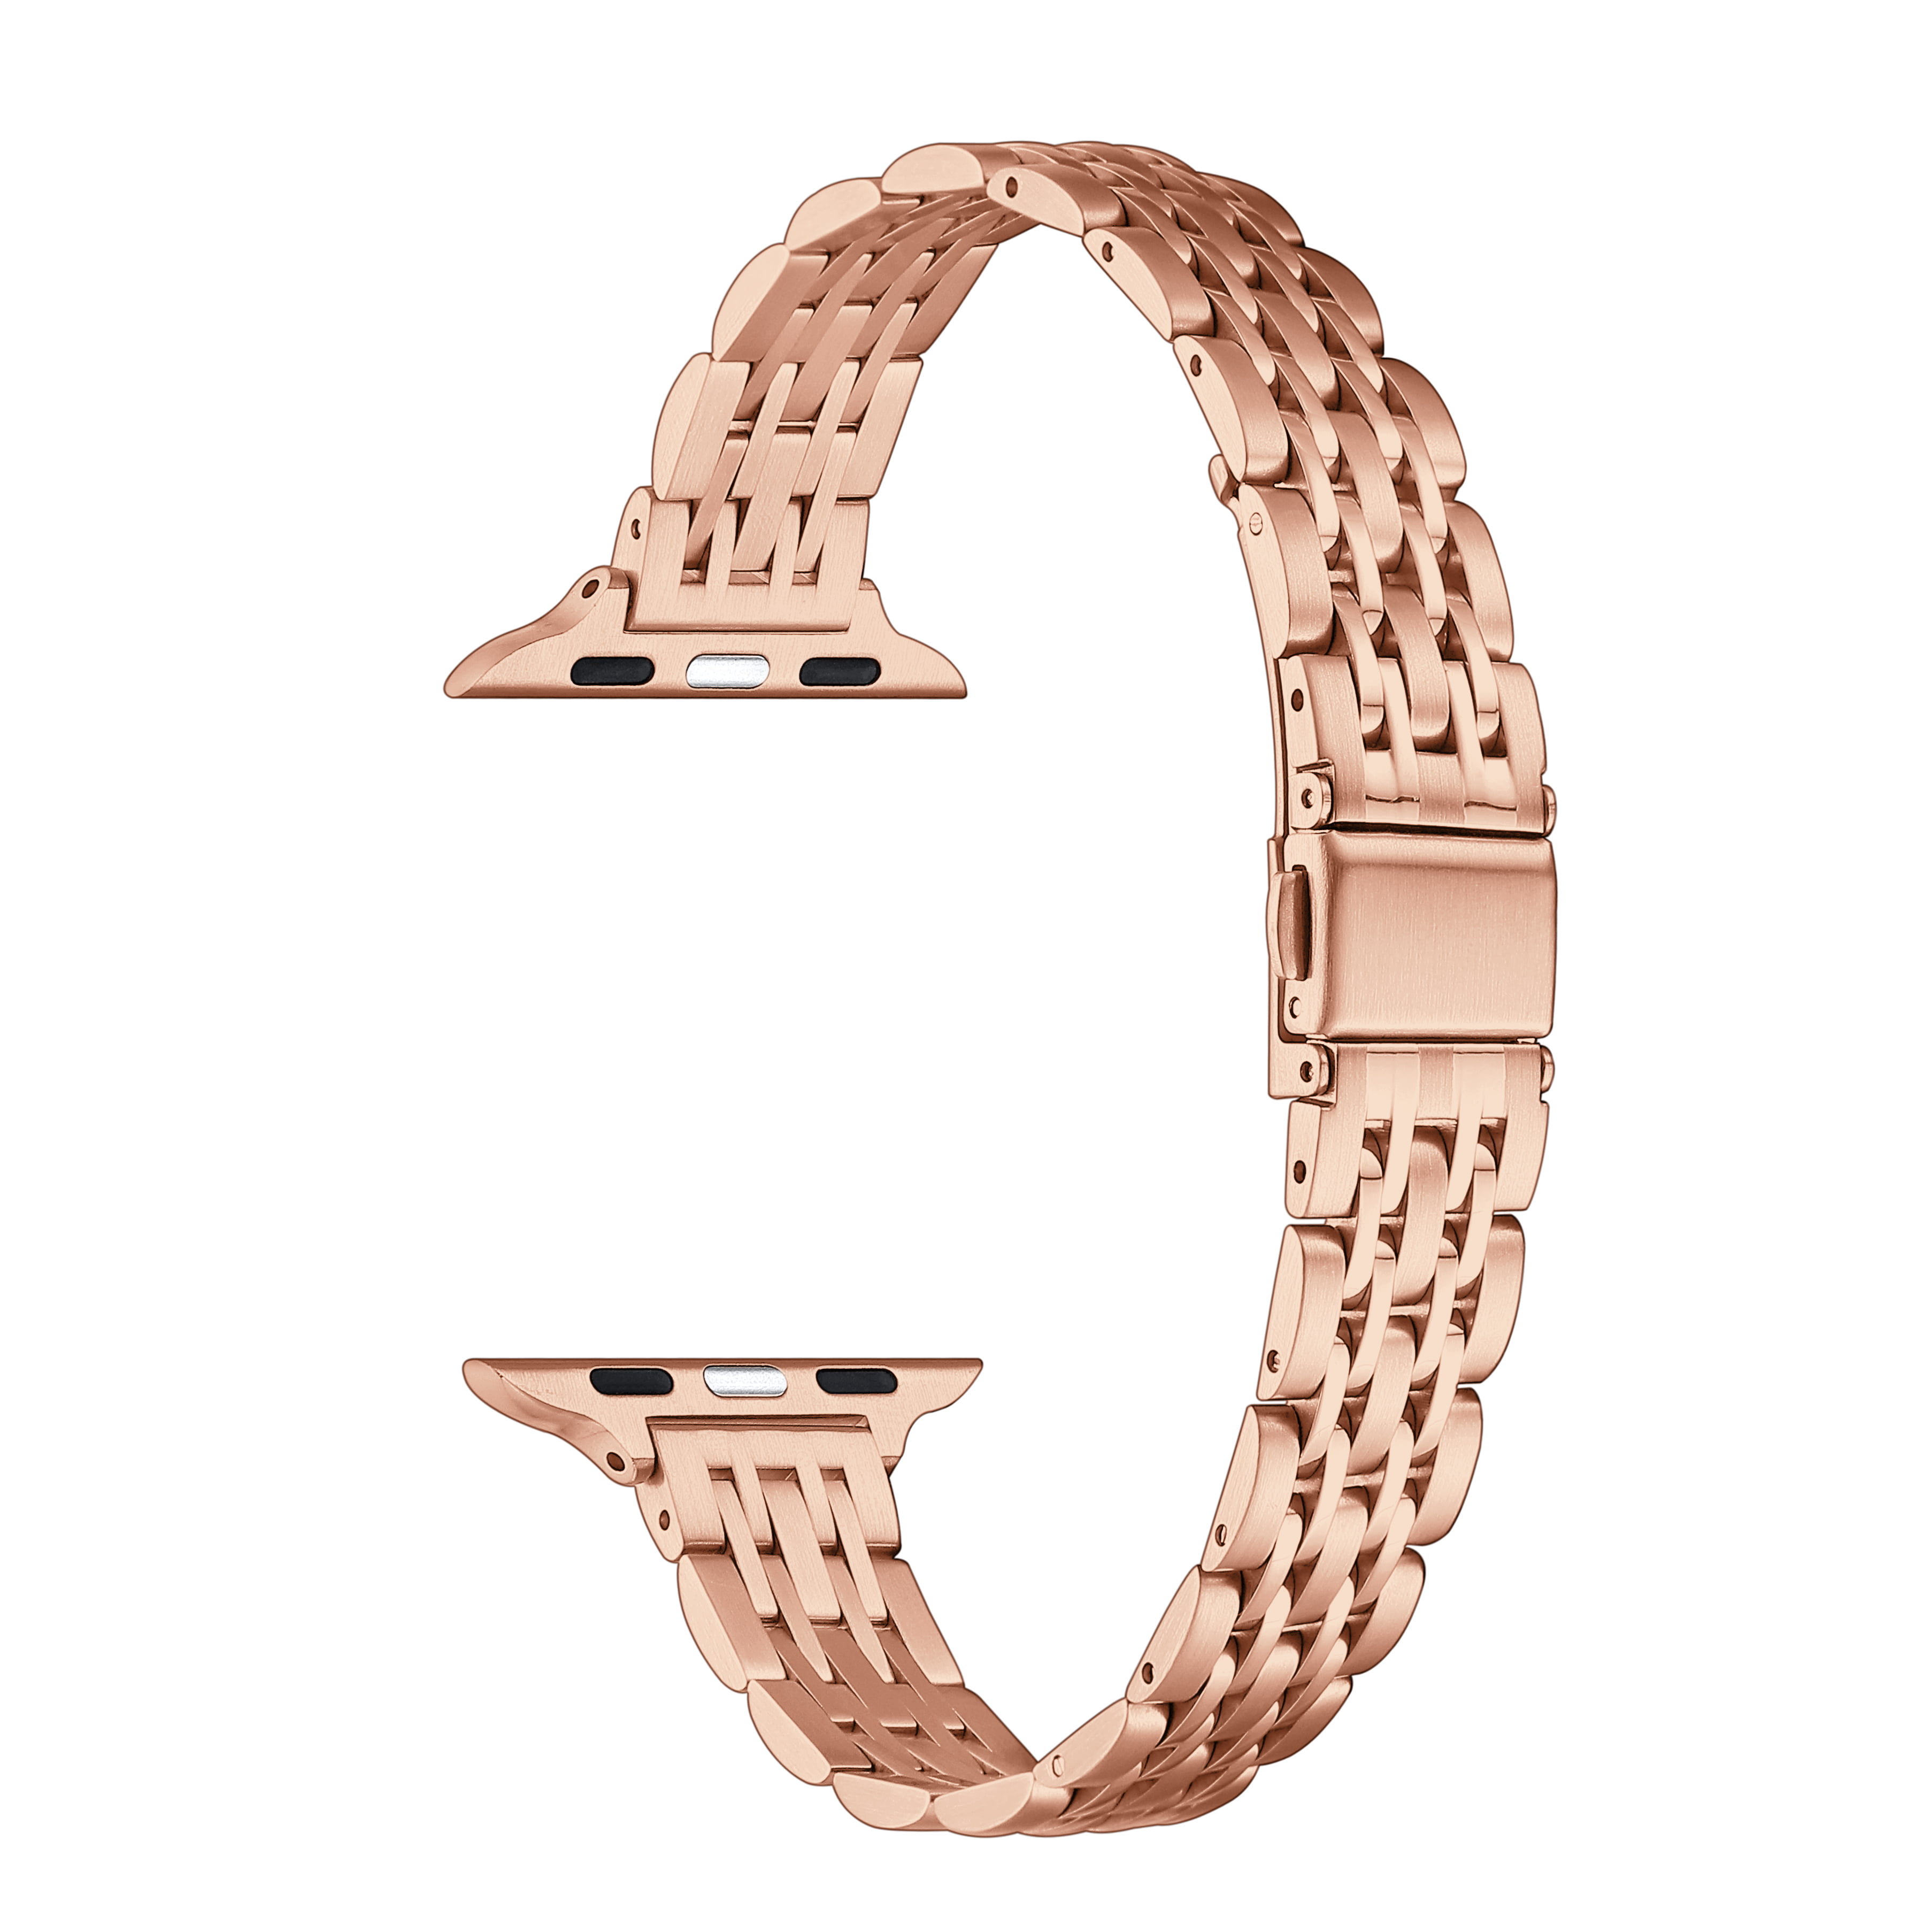 Pretty Little Thing Apple Watch Band Rose Gold / 44mm